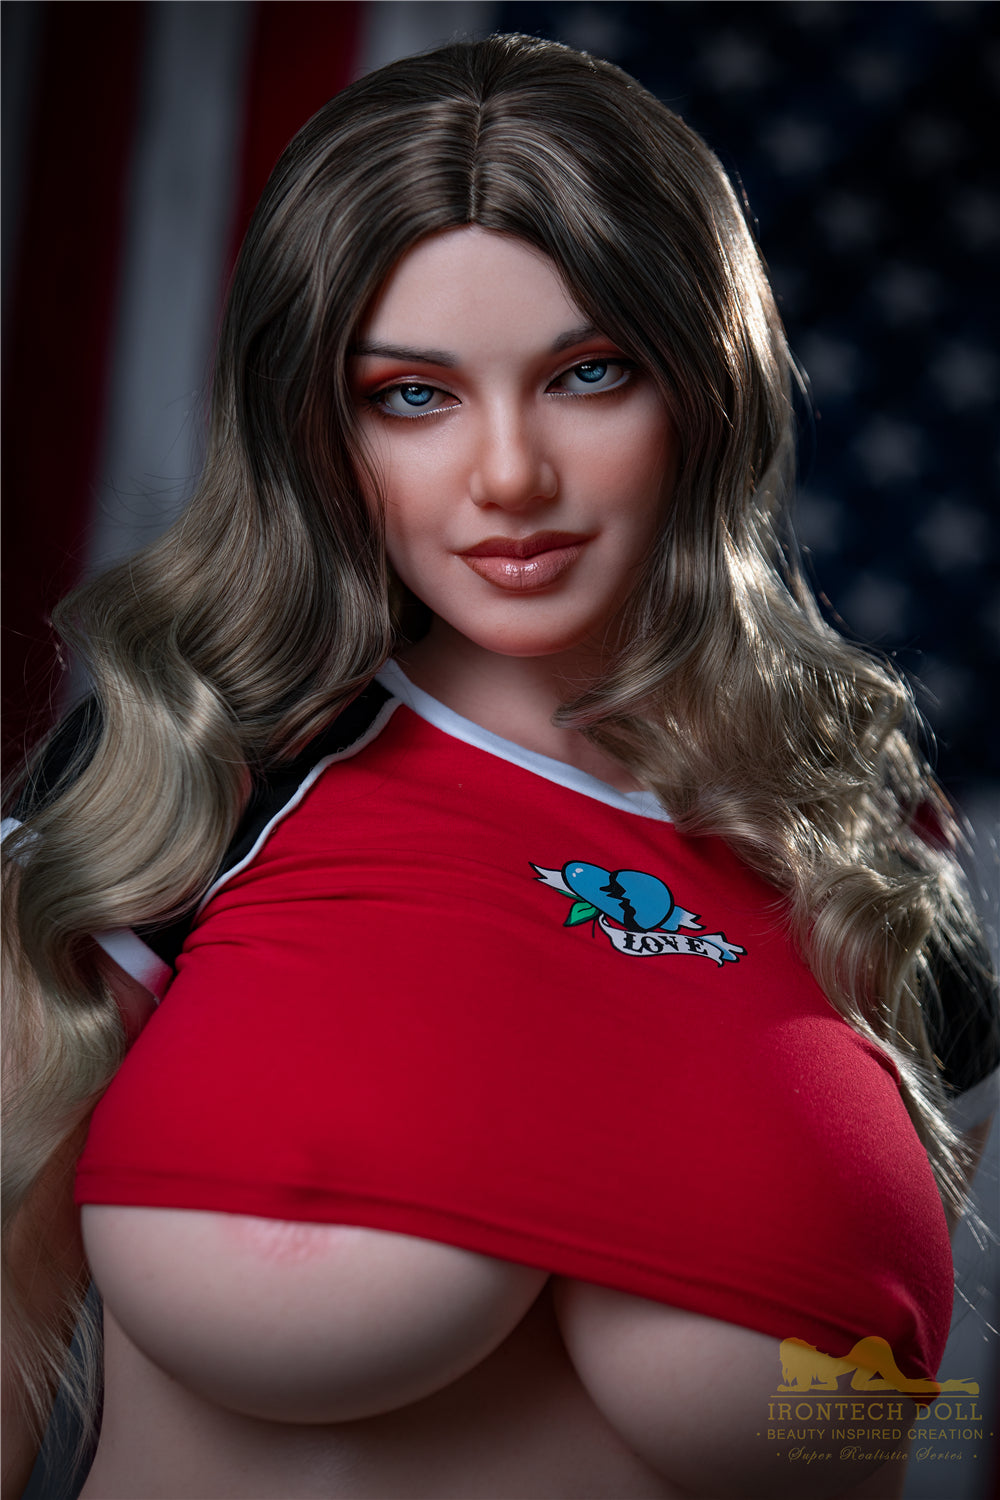 Irontech Doll 160 cm H Silicone - Haley | Buy Sex Dolls at DOLLS ACTUALLY